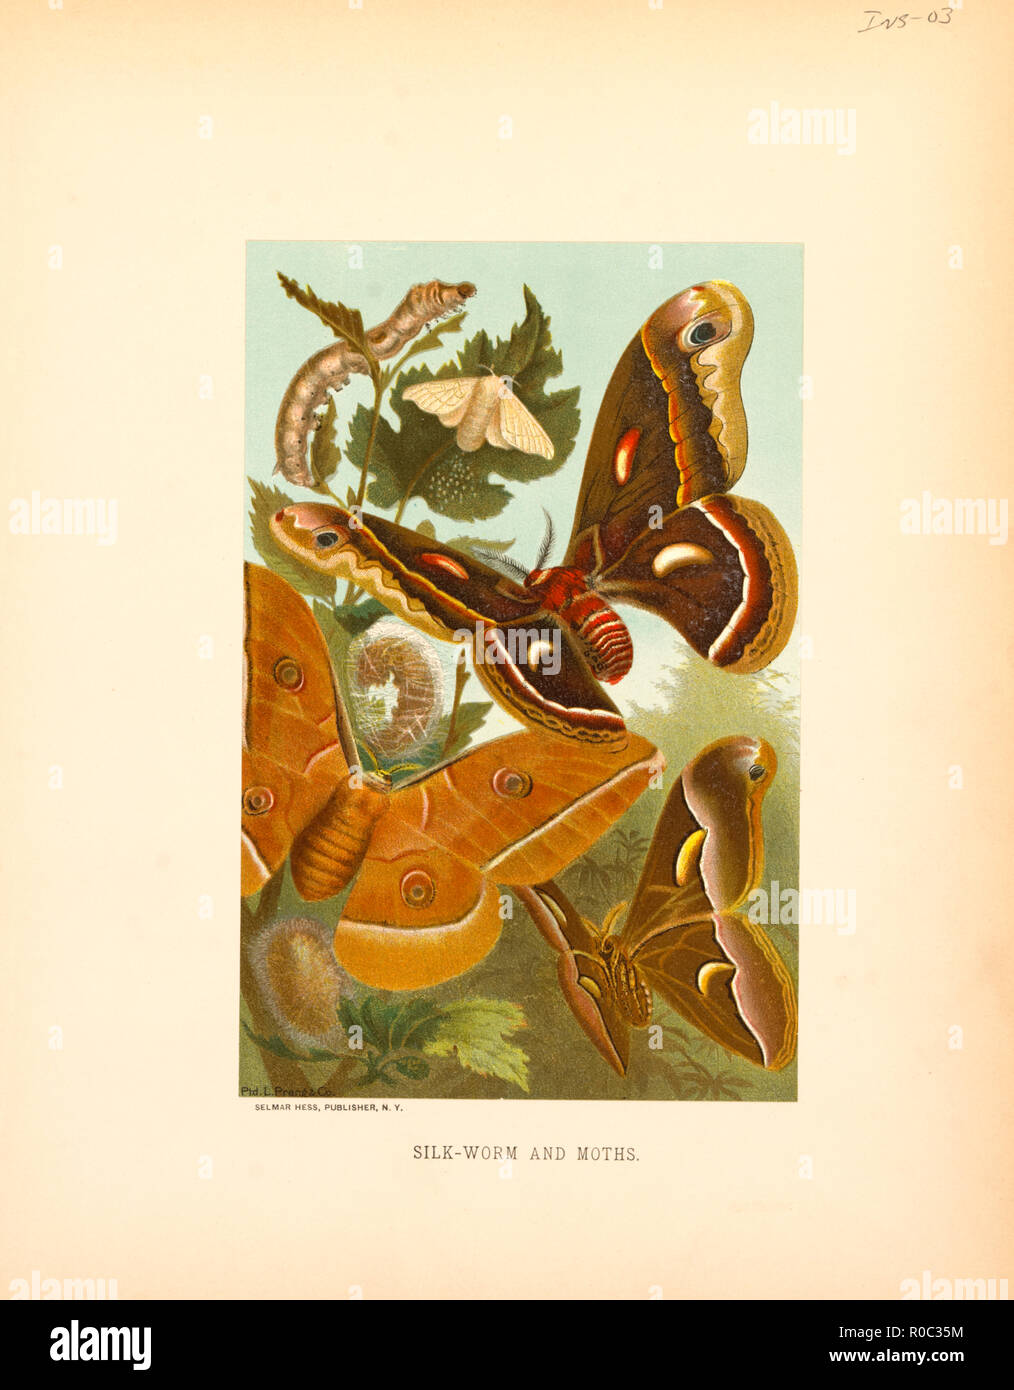 Silk-Worm and Moths, Selmar Press Publisher, NY, 1898 Stock Photo